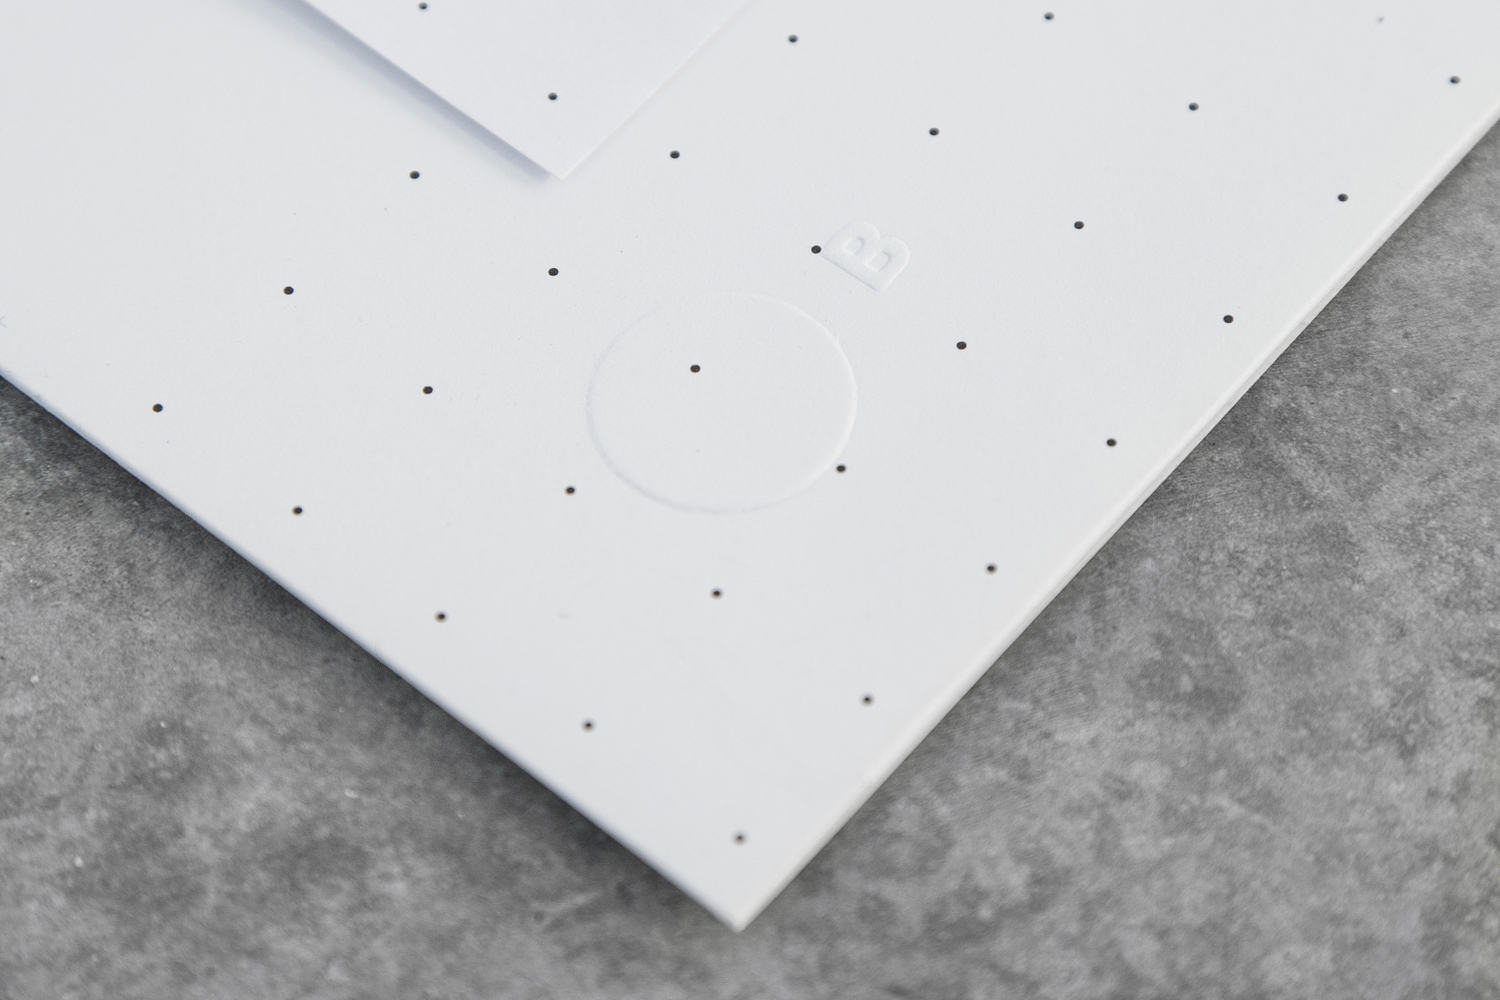 Brand identity and blind embossed stationery for Mexican architecture studio Obra Blanca designed by Savvy